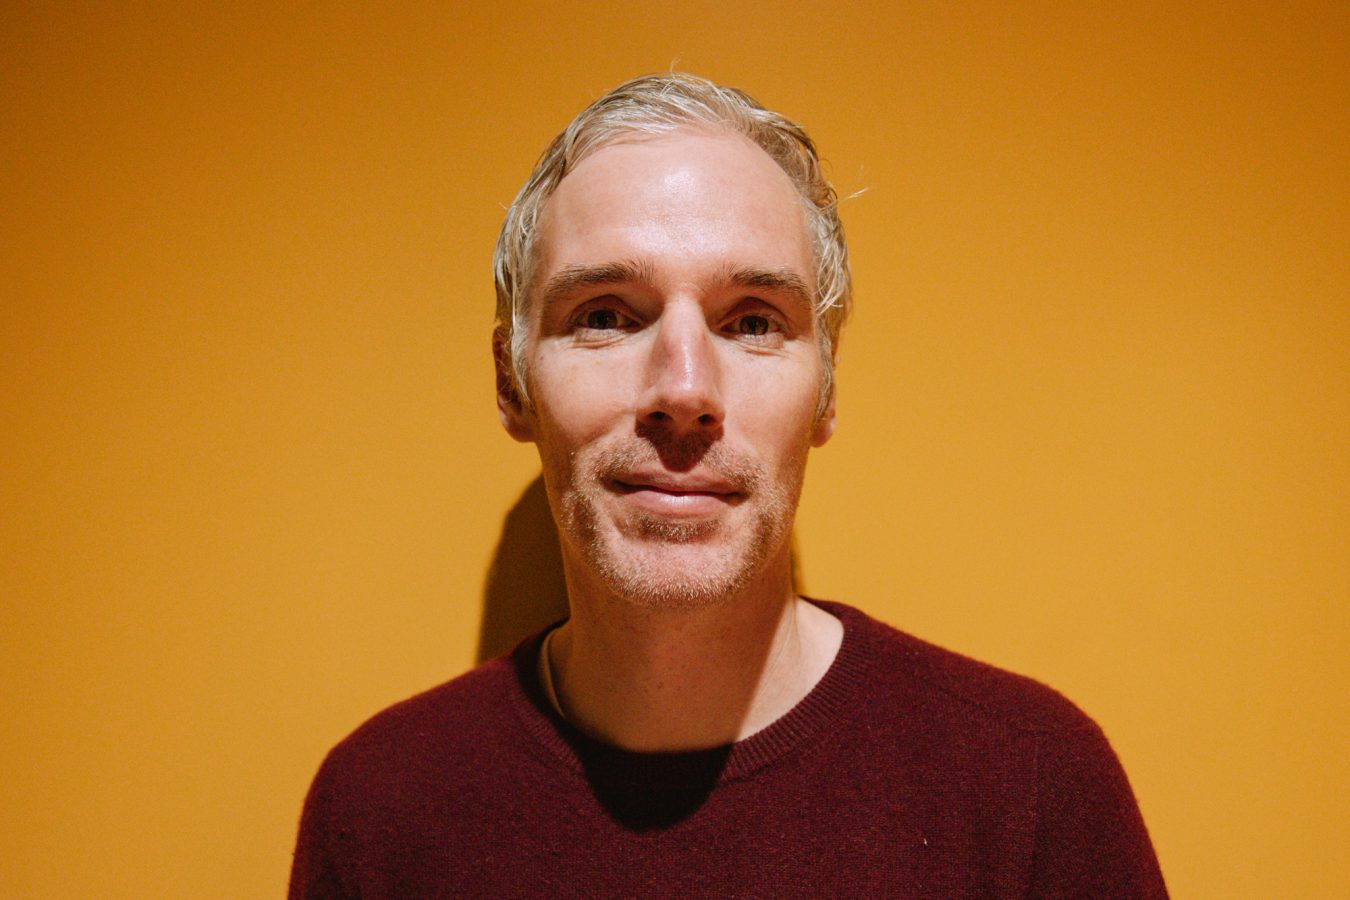 Head and shoulder shot of Dave with short grey hair wearing a dark red crew jumper standing in front of a yellow background.